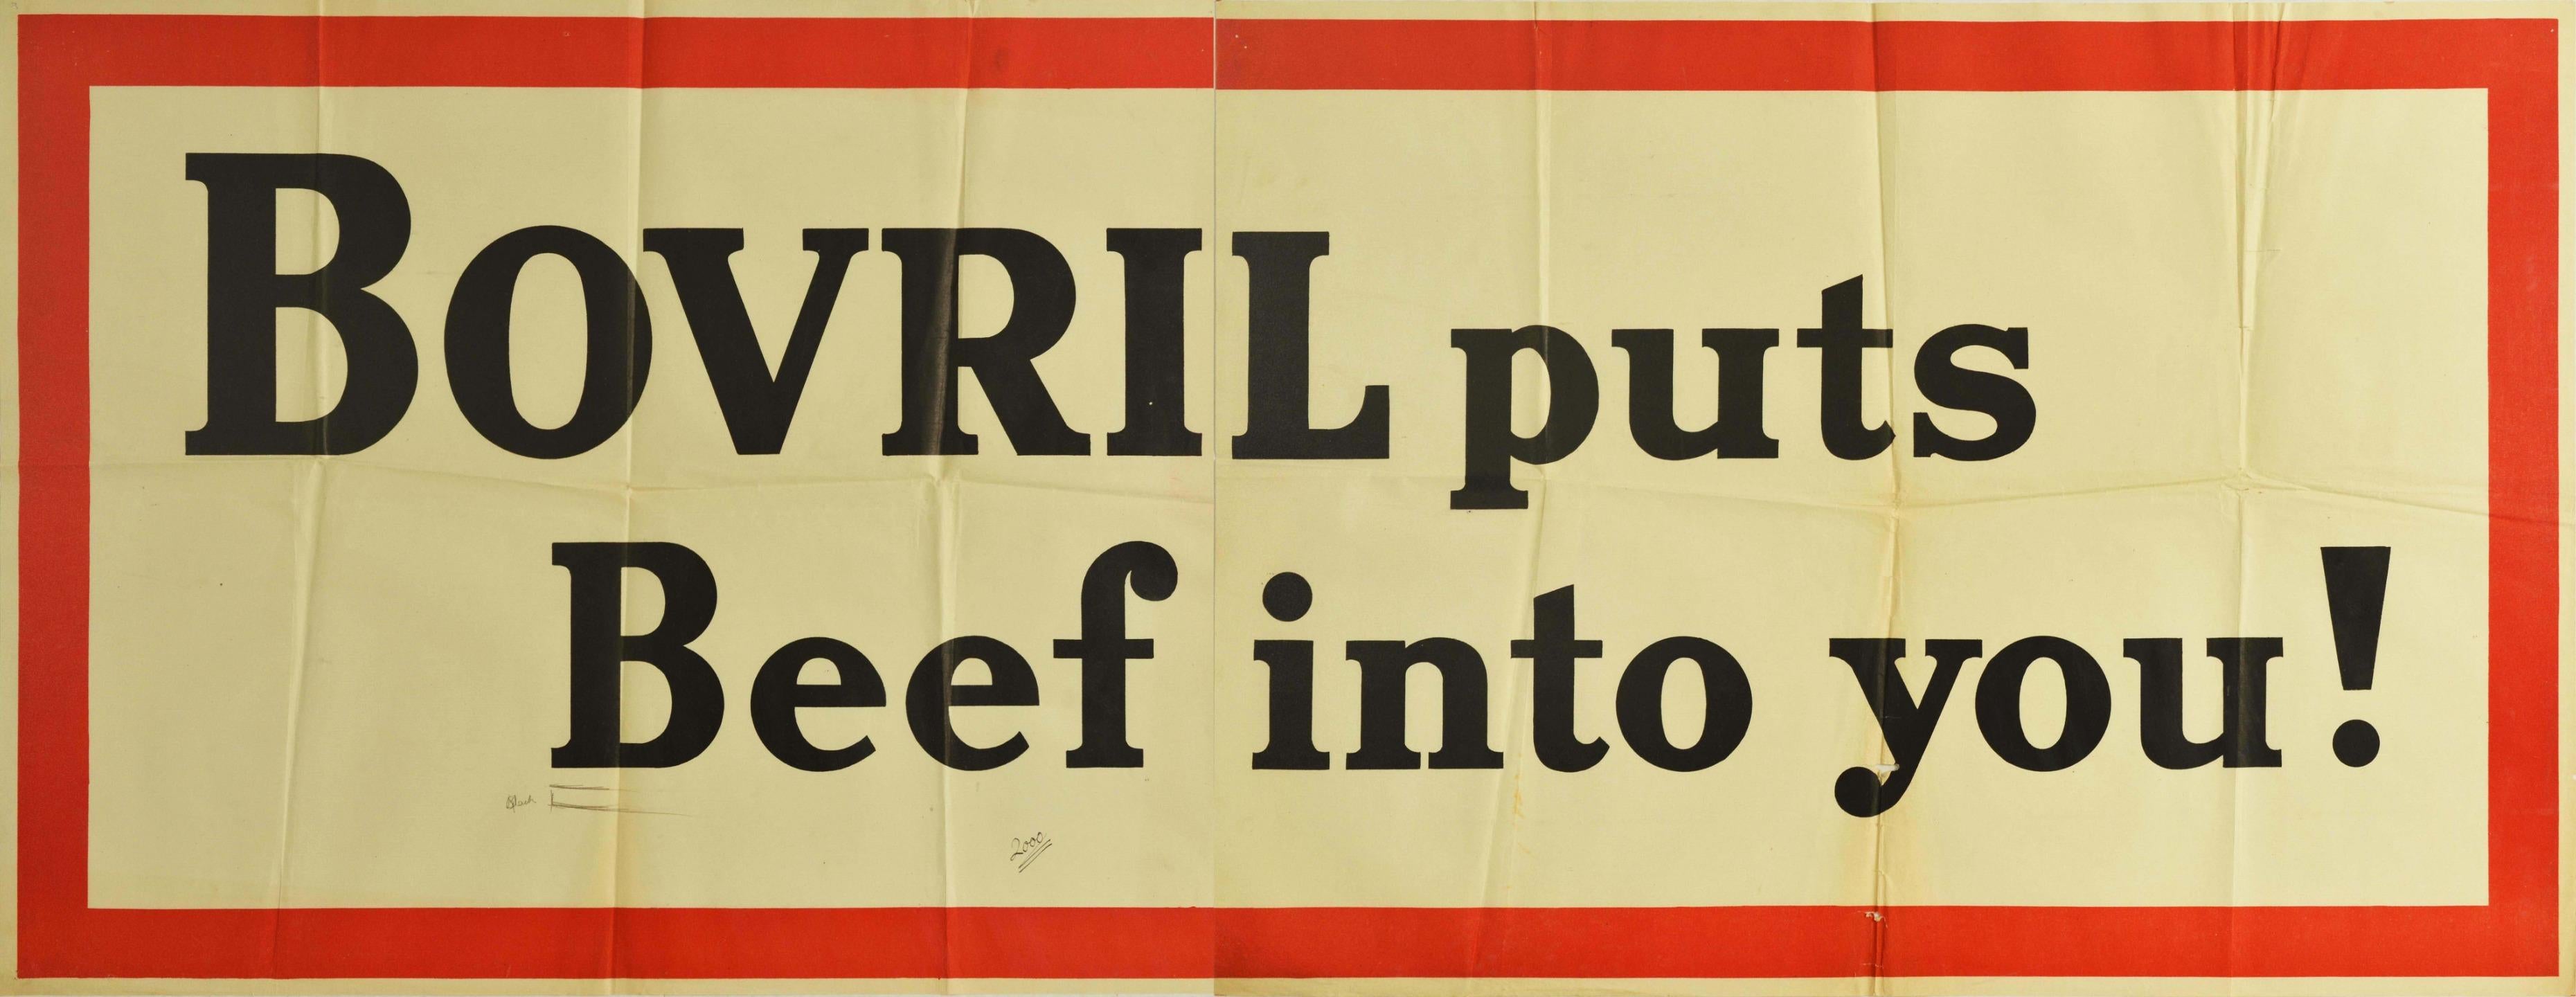 Original vintage food advertising poster for Bovril - Bovril puts Beef into you! - featuring bold black lettering on a white background in a thick red frame border. Printed in Britain in the 1930s, this campaign used puns and word play to resemble